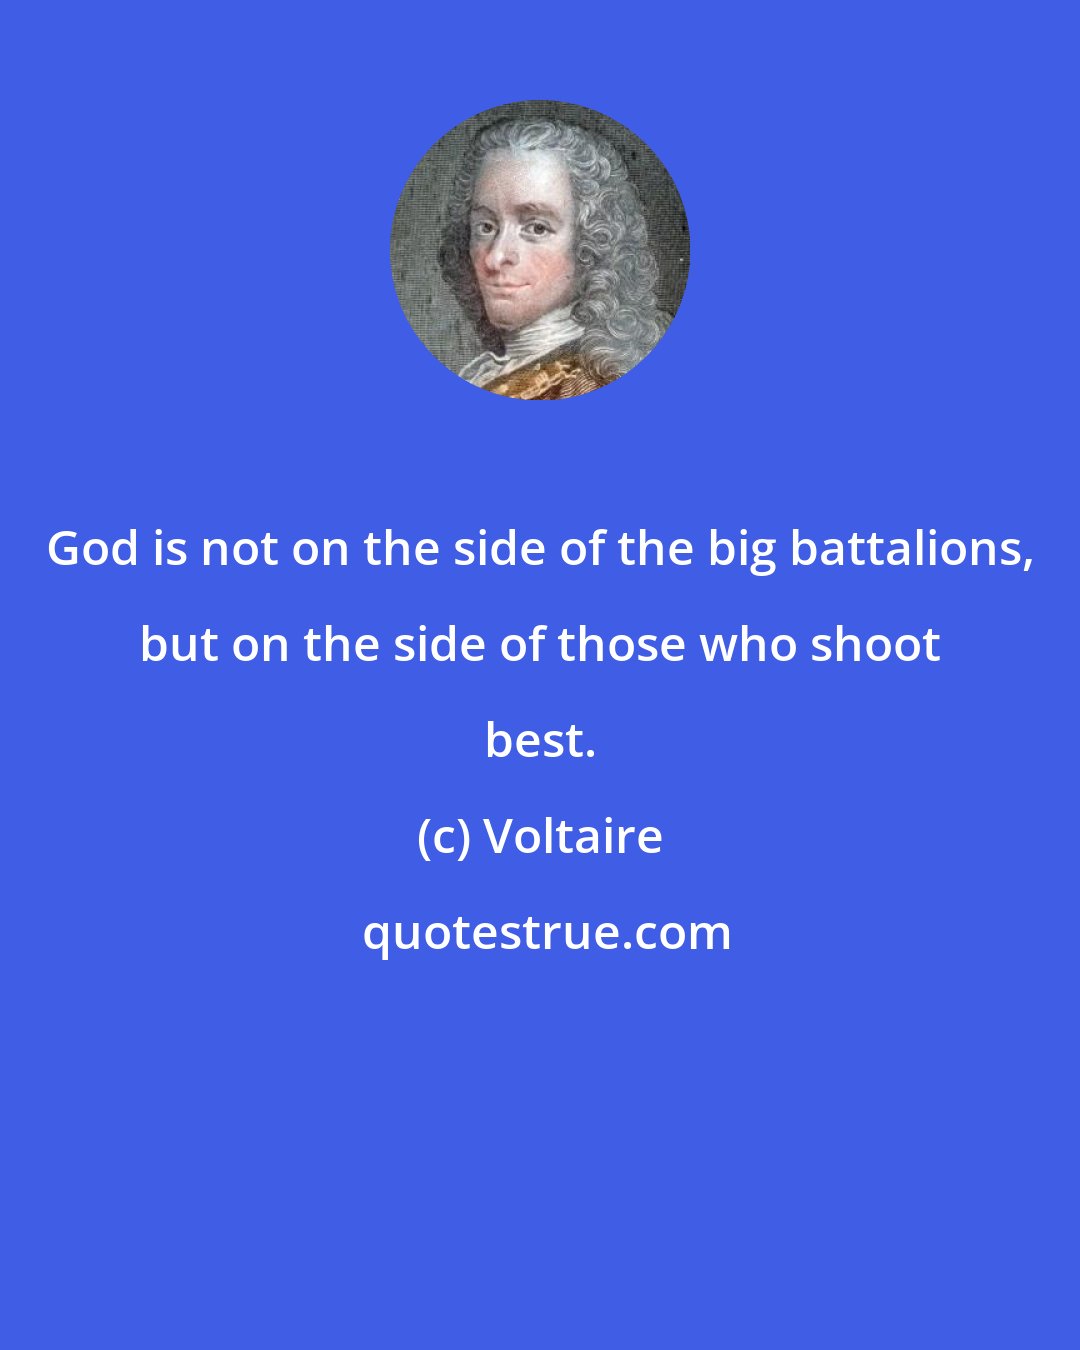 Voltaire: God is not on the side of the big battalions, but on the side of those who shoot best.